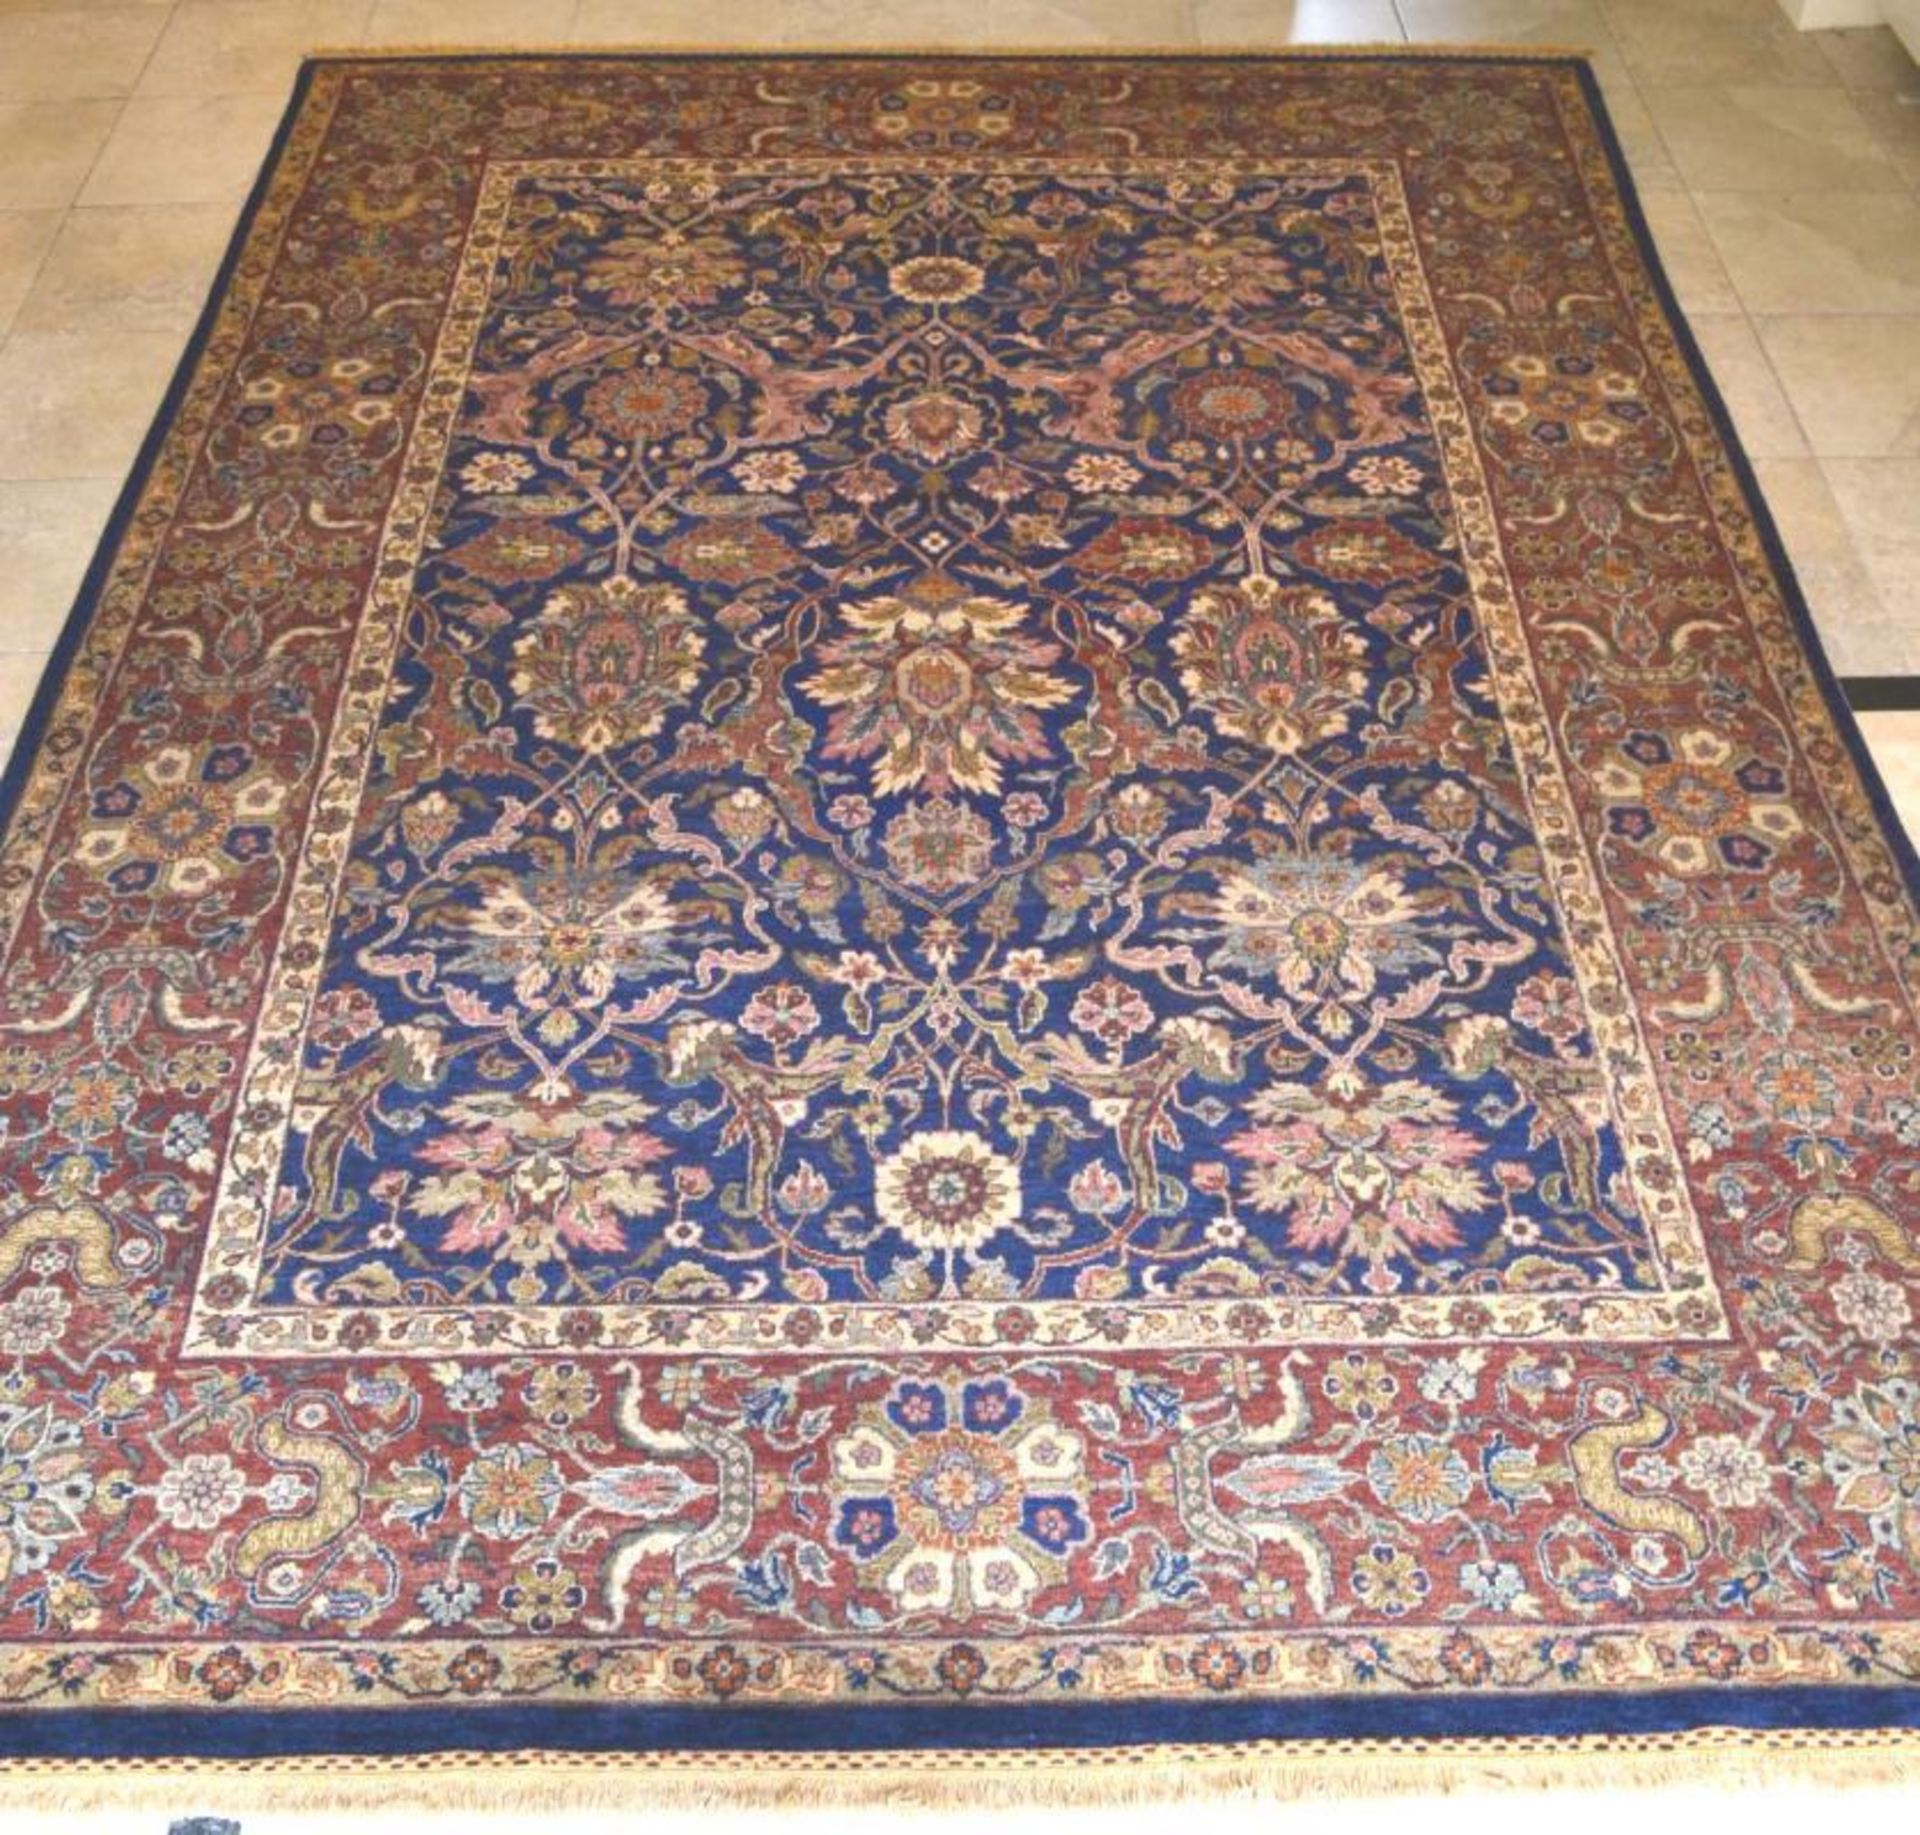 1 x Fine Indian Vegetable Dyed Handmade Carpet in Navy and Rust - All Wool With Cotton Foundation - - Image 13 of 22